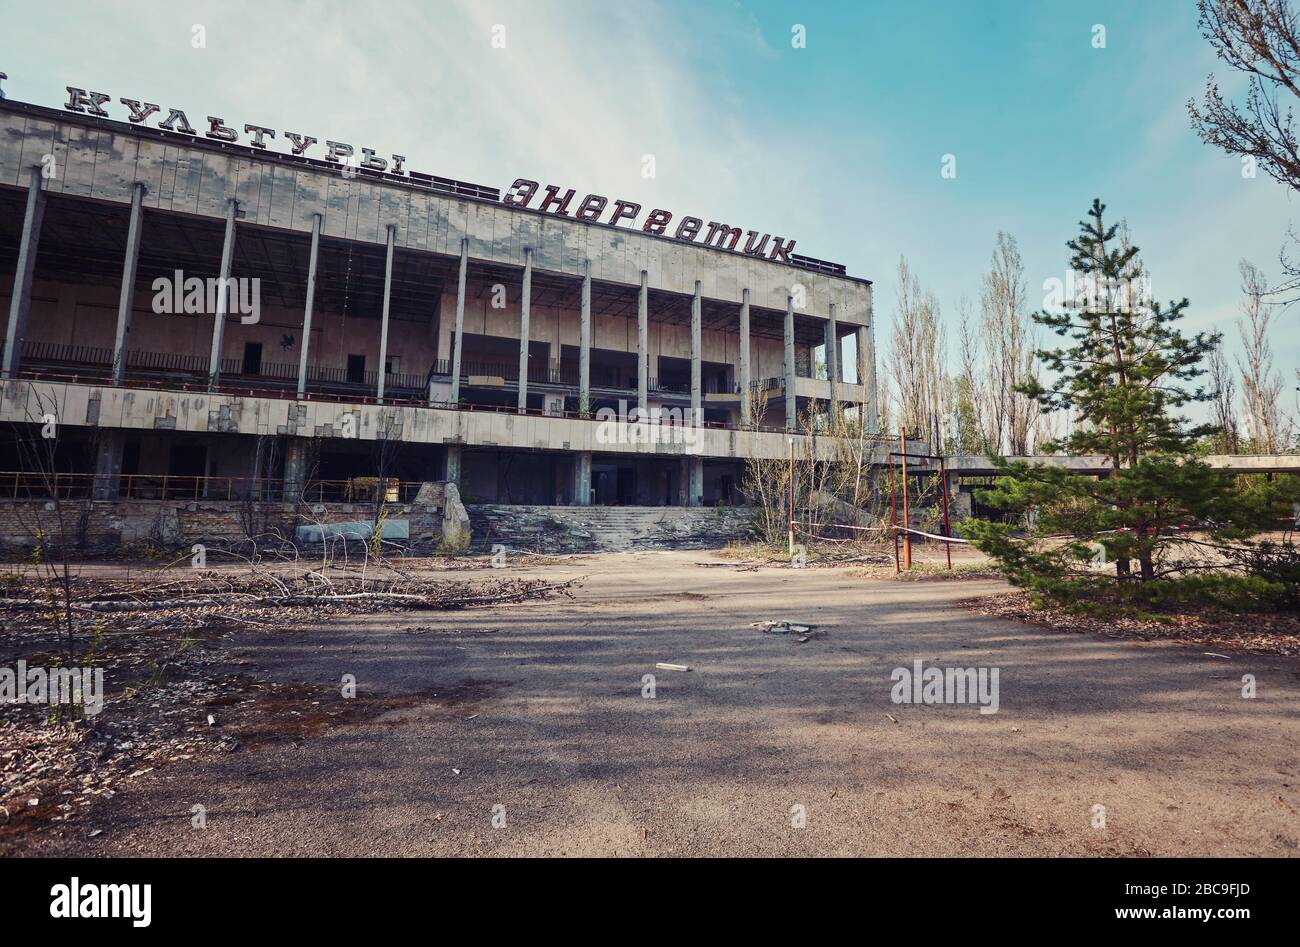 Pripyat, Ukraine - April 25 2019: Inscription Palace of Culture Energetik . Abandoned building in Pripyat. Sign Energetik on the roof of the building. Stock Photo